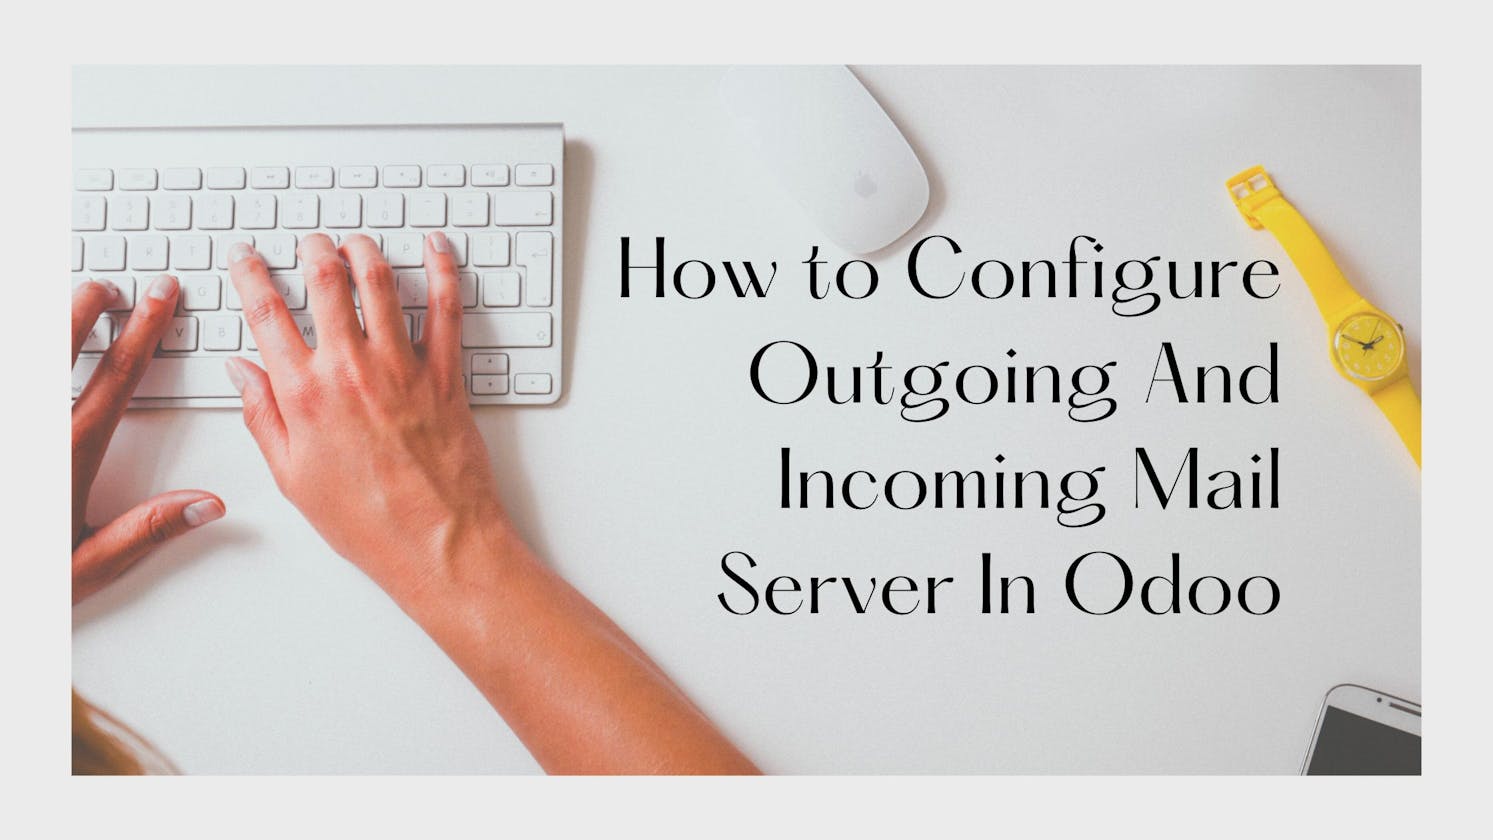 How to Configure Outgoing and Incoming Mail Servers in Odoo.